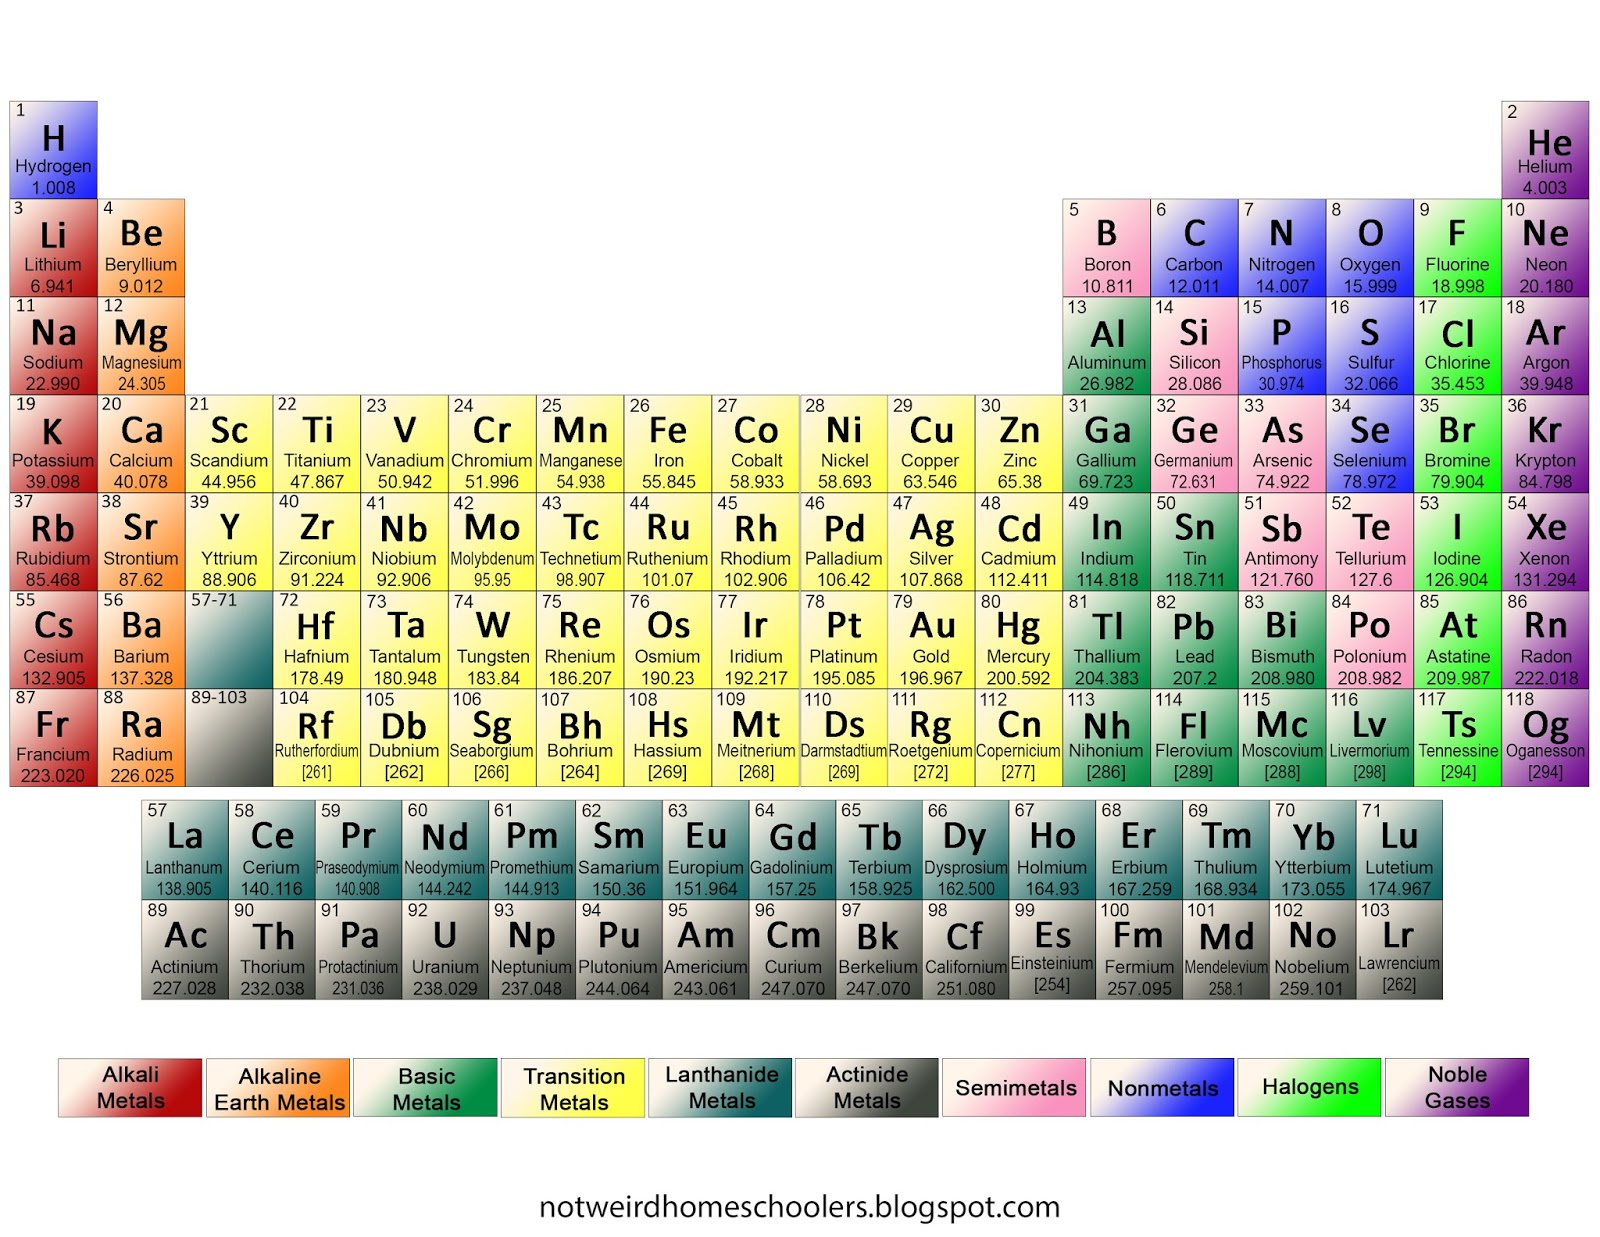 free-homeschooling-resource-periodic-table-of-elements-printable